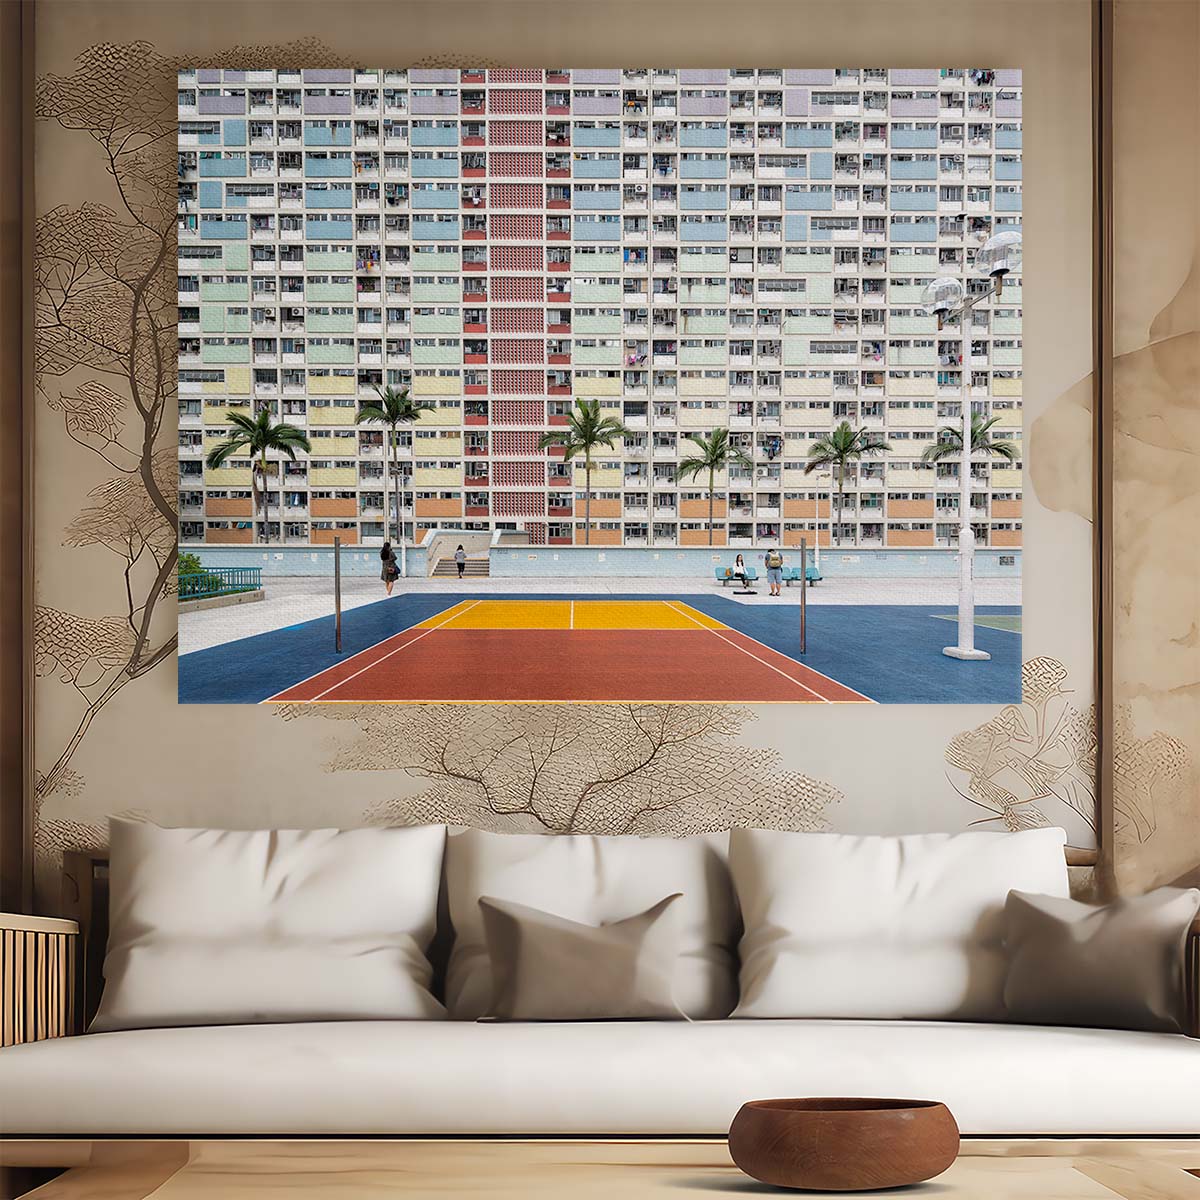 Colorful Choi Hung Estate Basketball Court Wall Art by Luxuriance Designs. Made in USA.